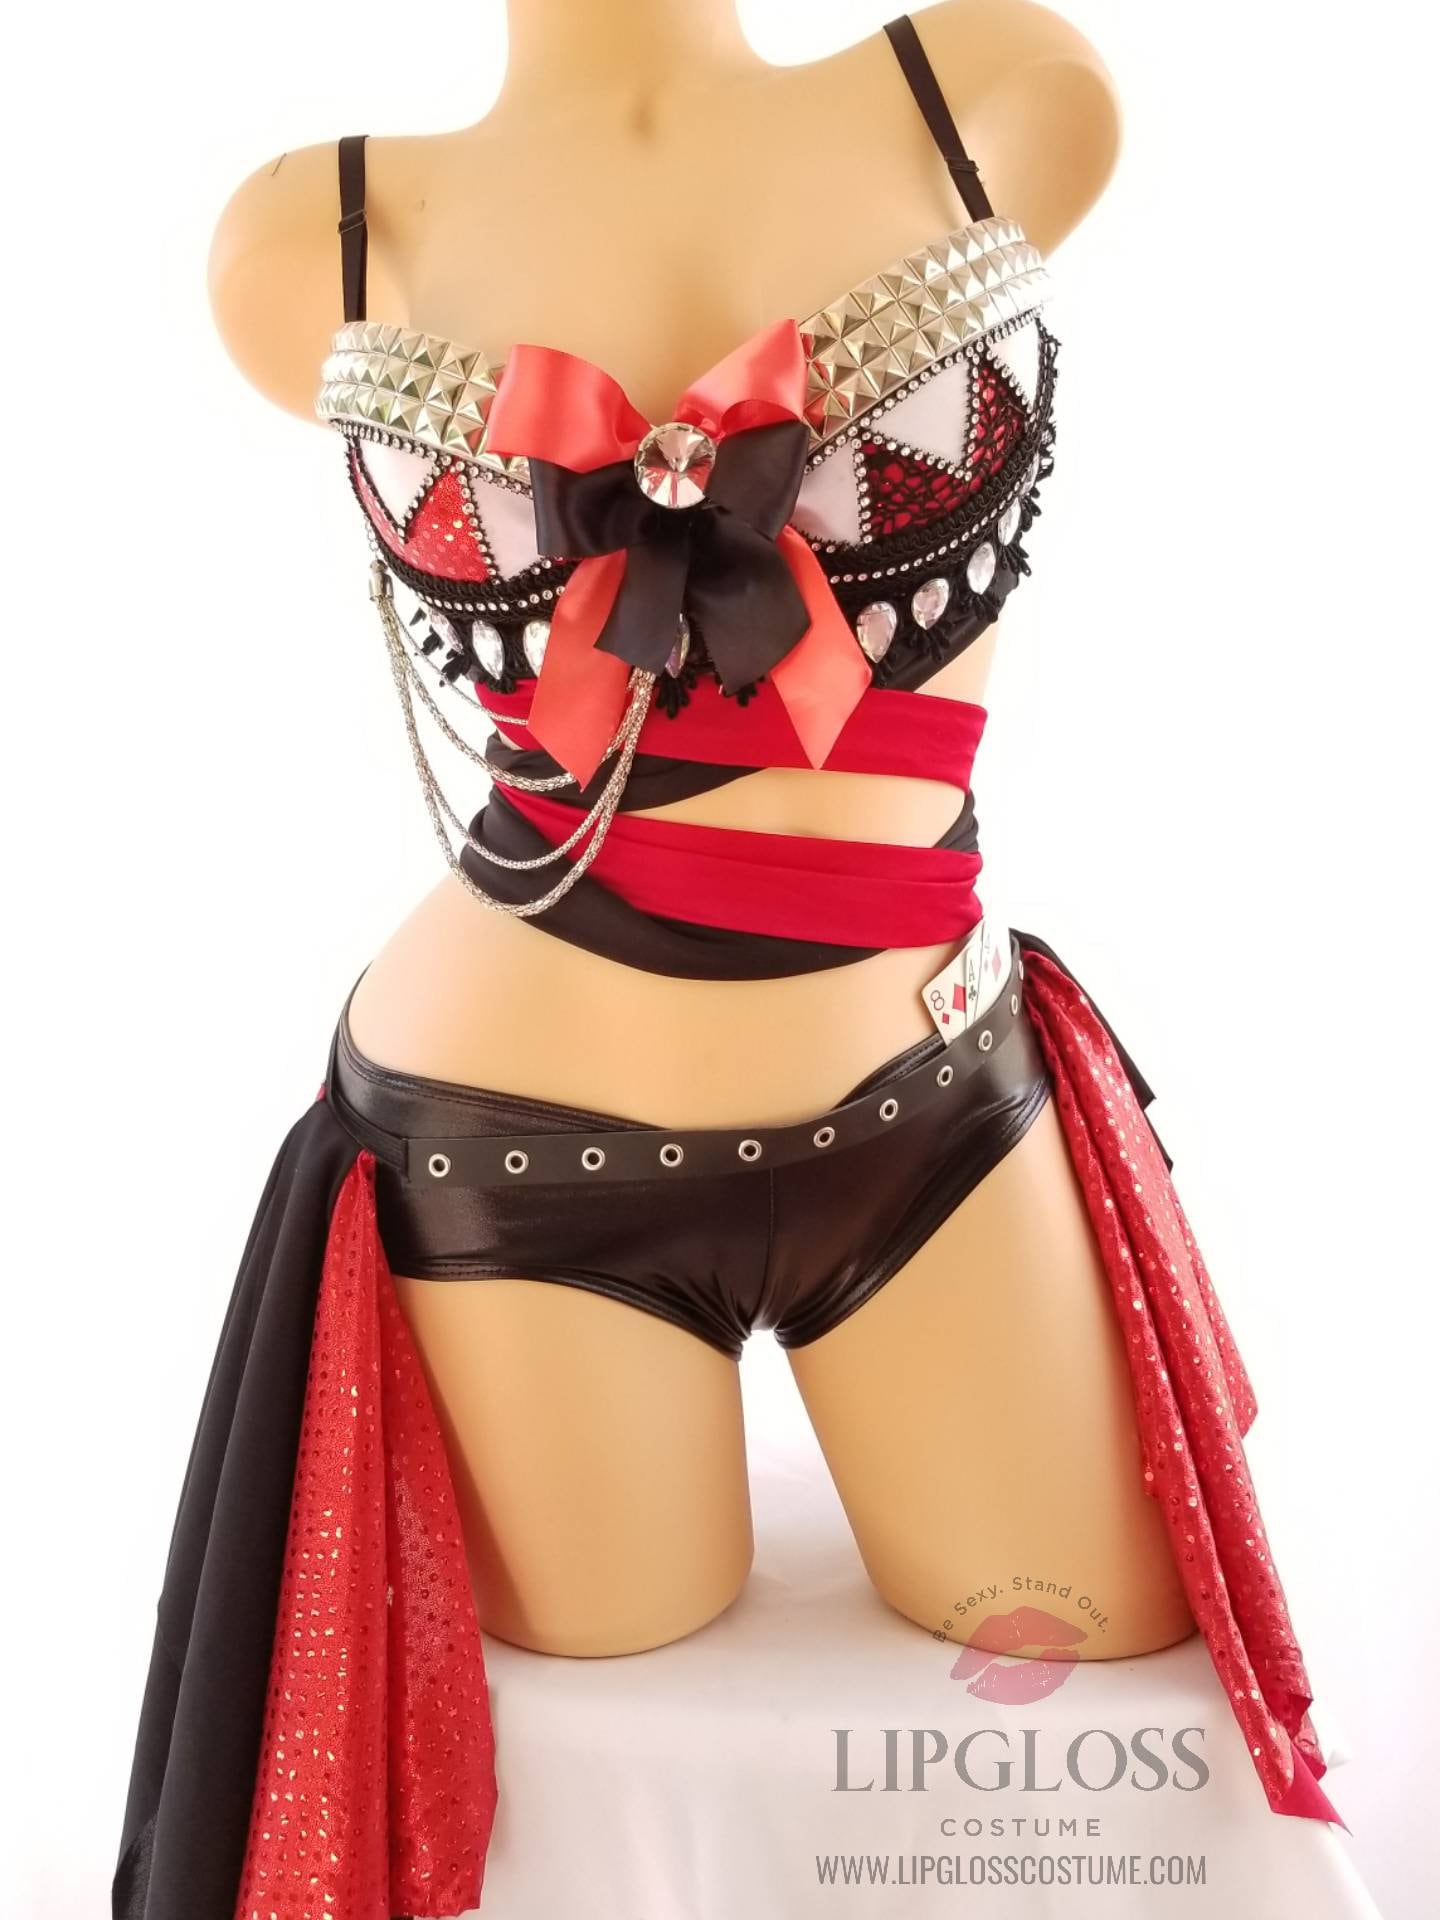 ashley elizabeth rose recommends harley quinn sexy outfit pic